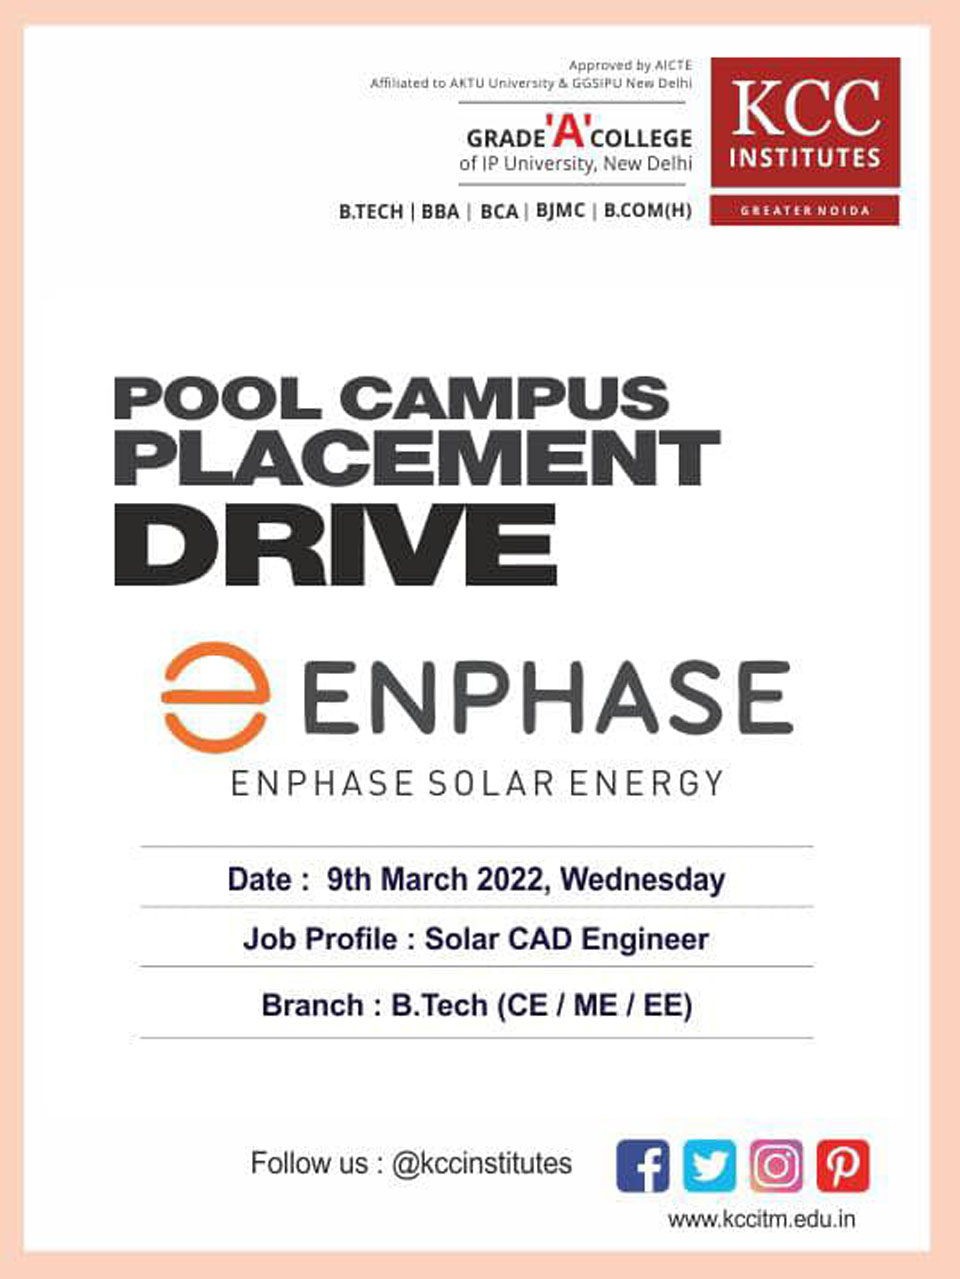 Pool Campus Placement Drive for Enphase Solar Energy on 9th March 2022 (Wednesday).